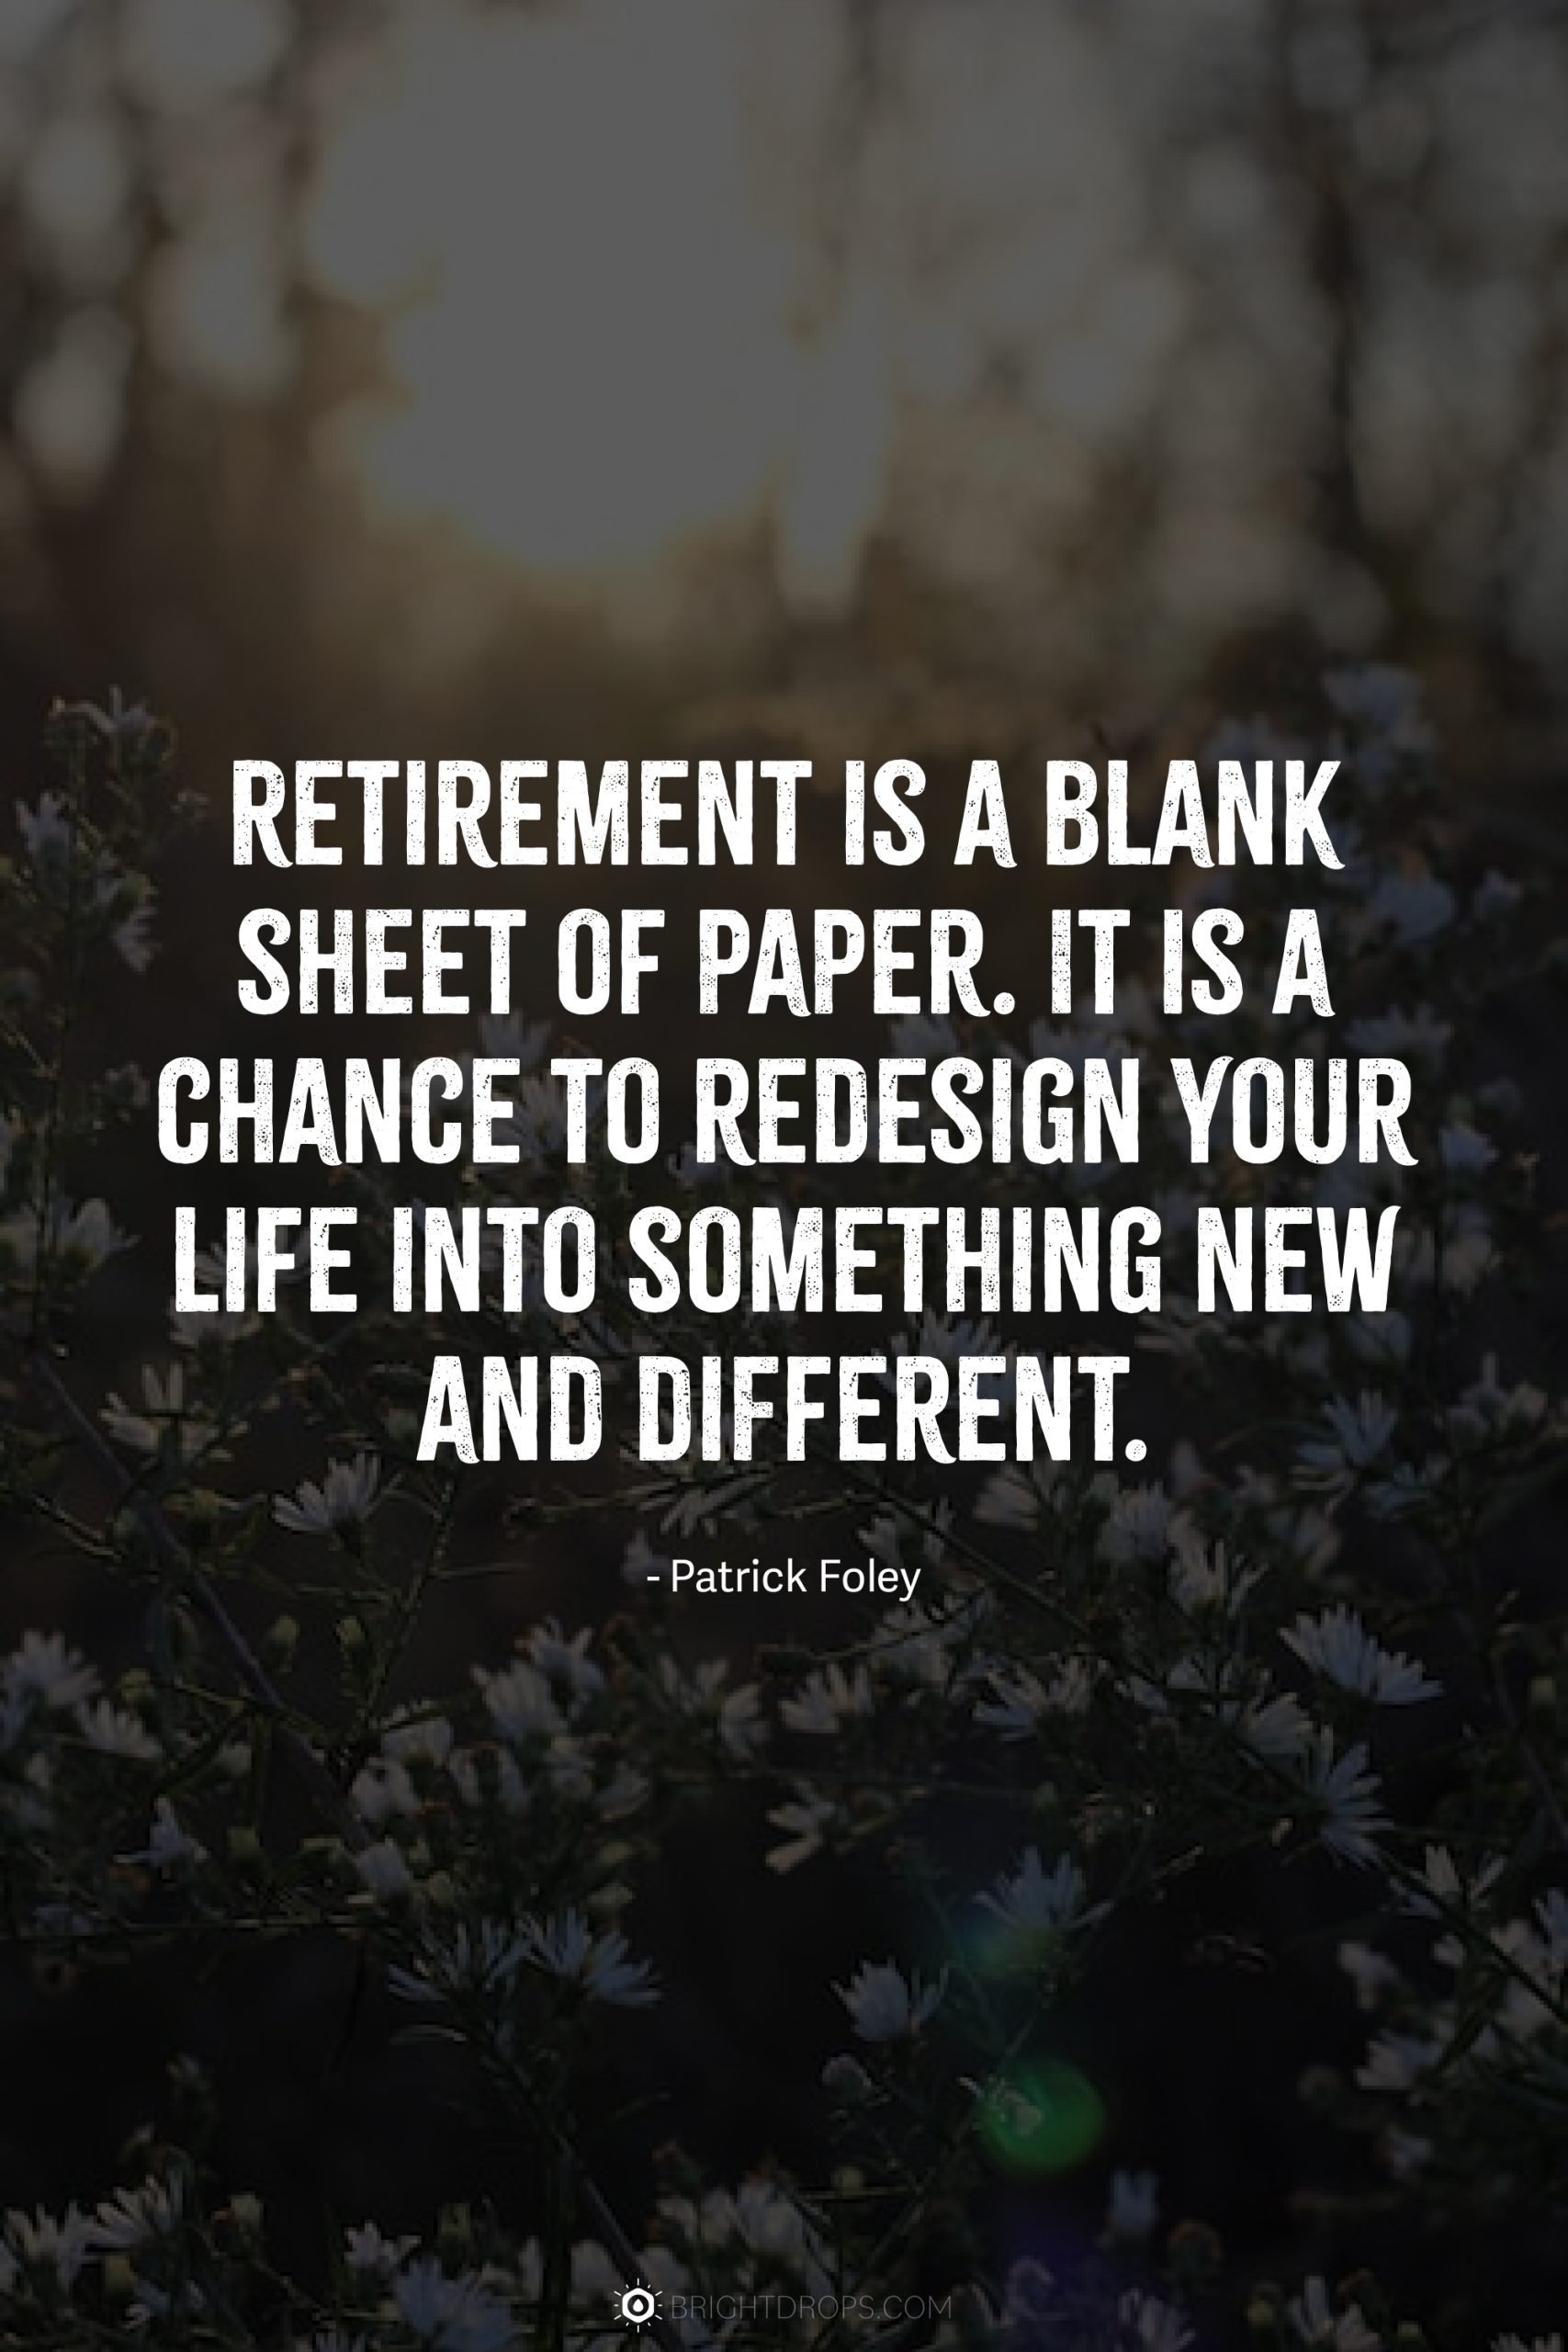 Retirement is a blank sheet of paper. It is a chance to redesign your life into something new and different.